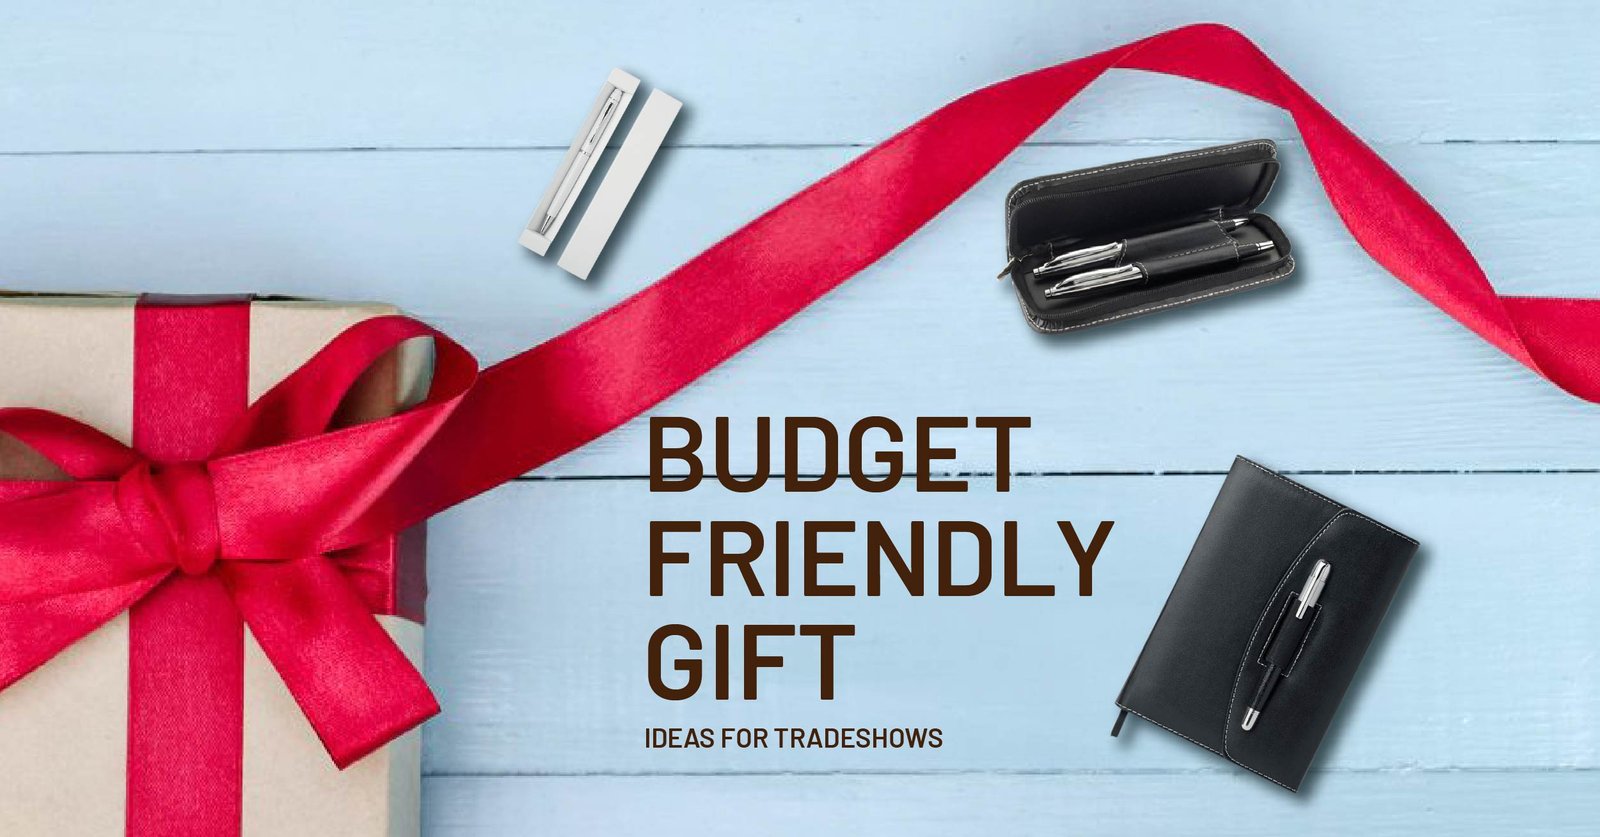 Budget Friendly Christmas Gift Guide: $8-$40 – Come Home For Comfort